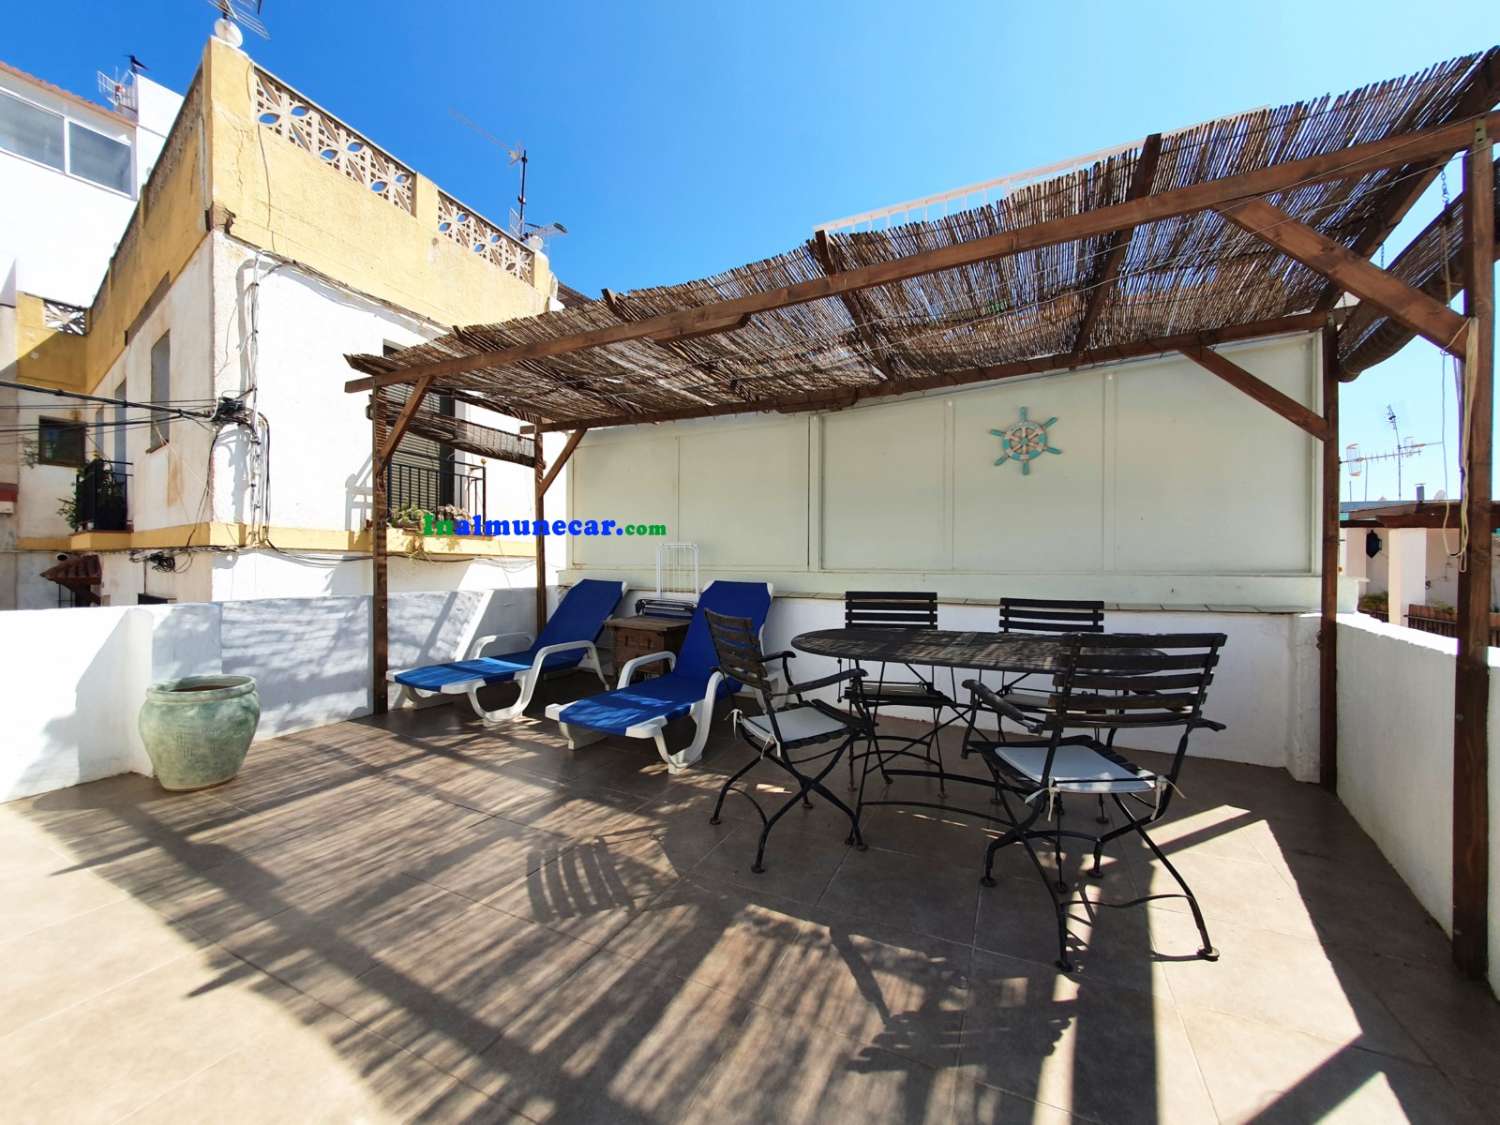 Town house for sale located in the Old Quarter of Almuñécar - with tourist licence